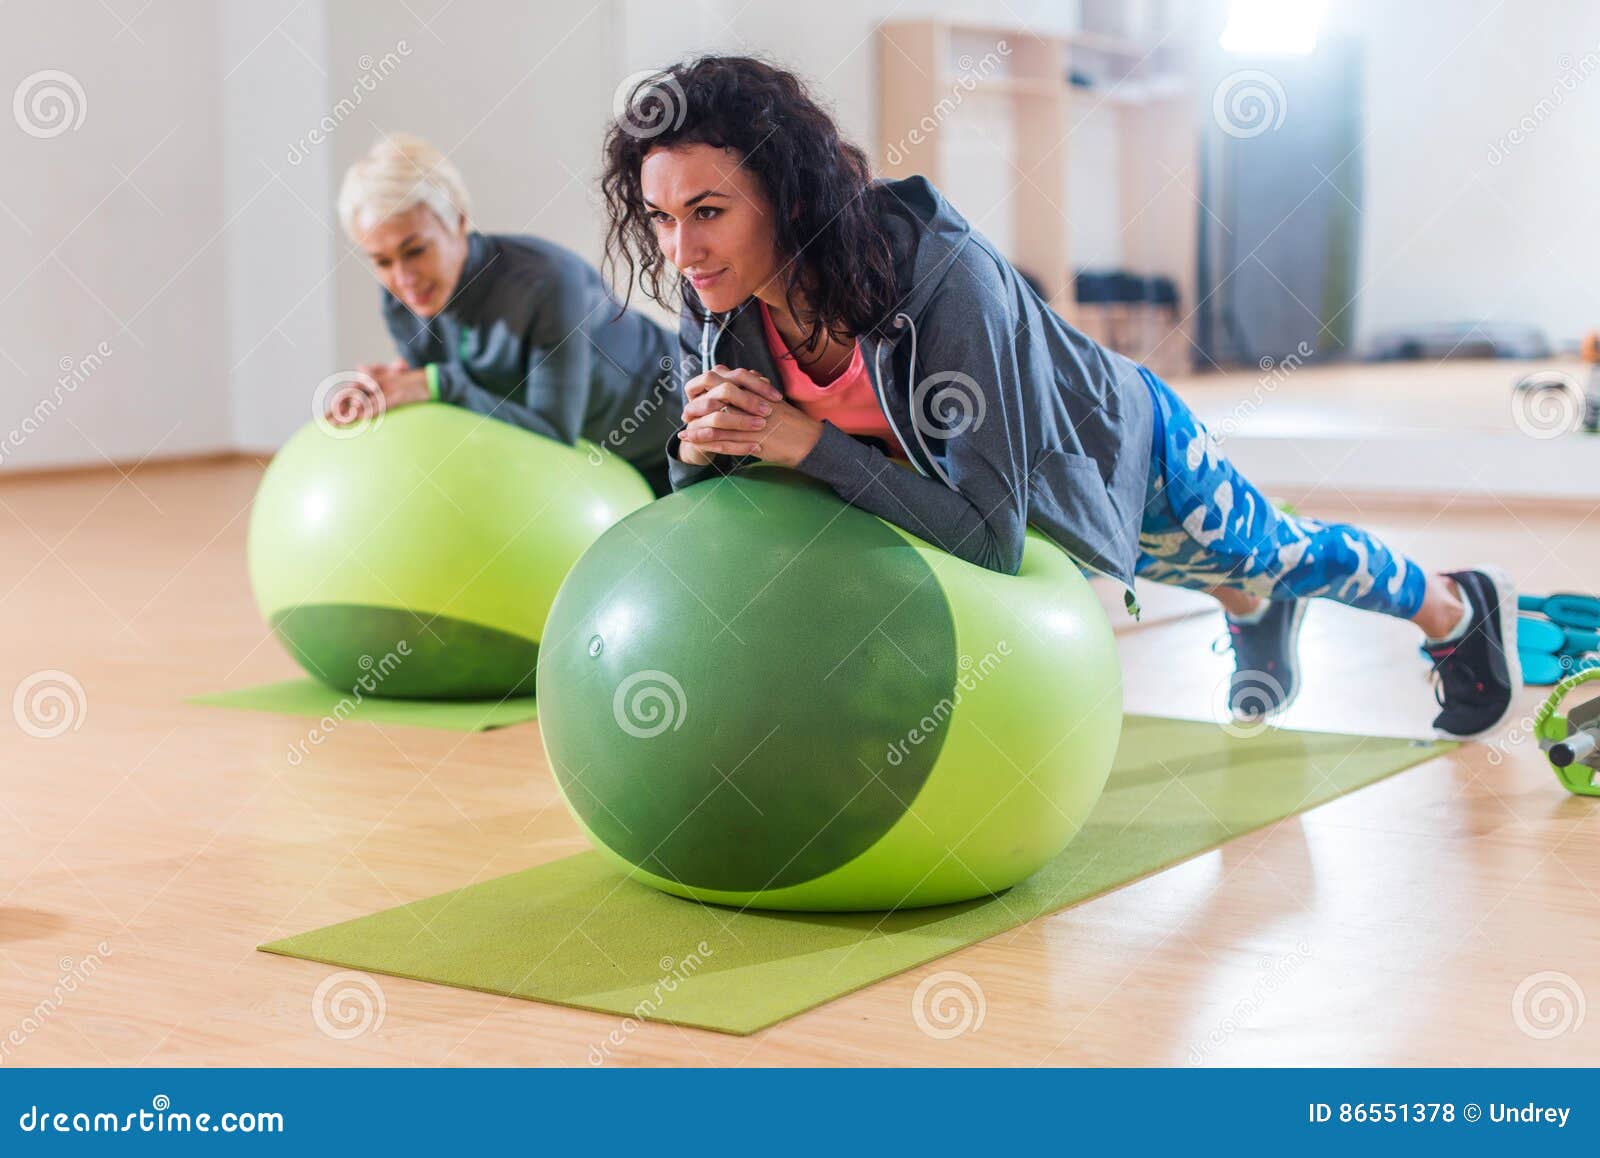 two positive women doing plank exercise lying on balance ball in gym